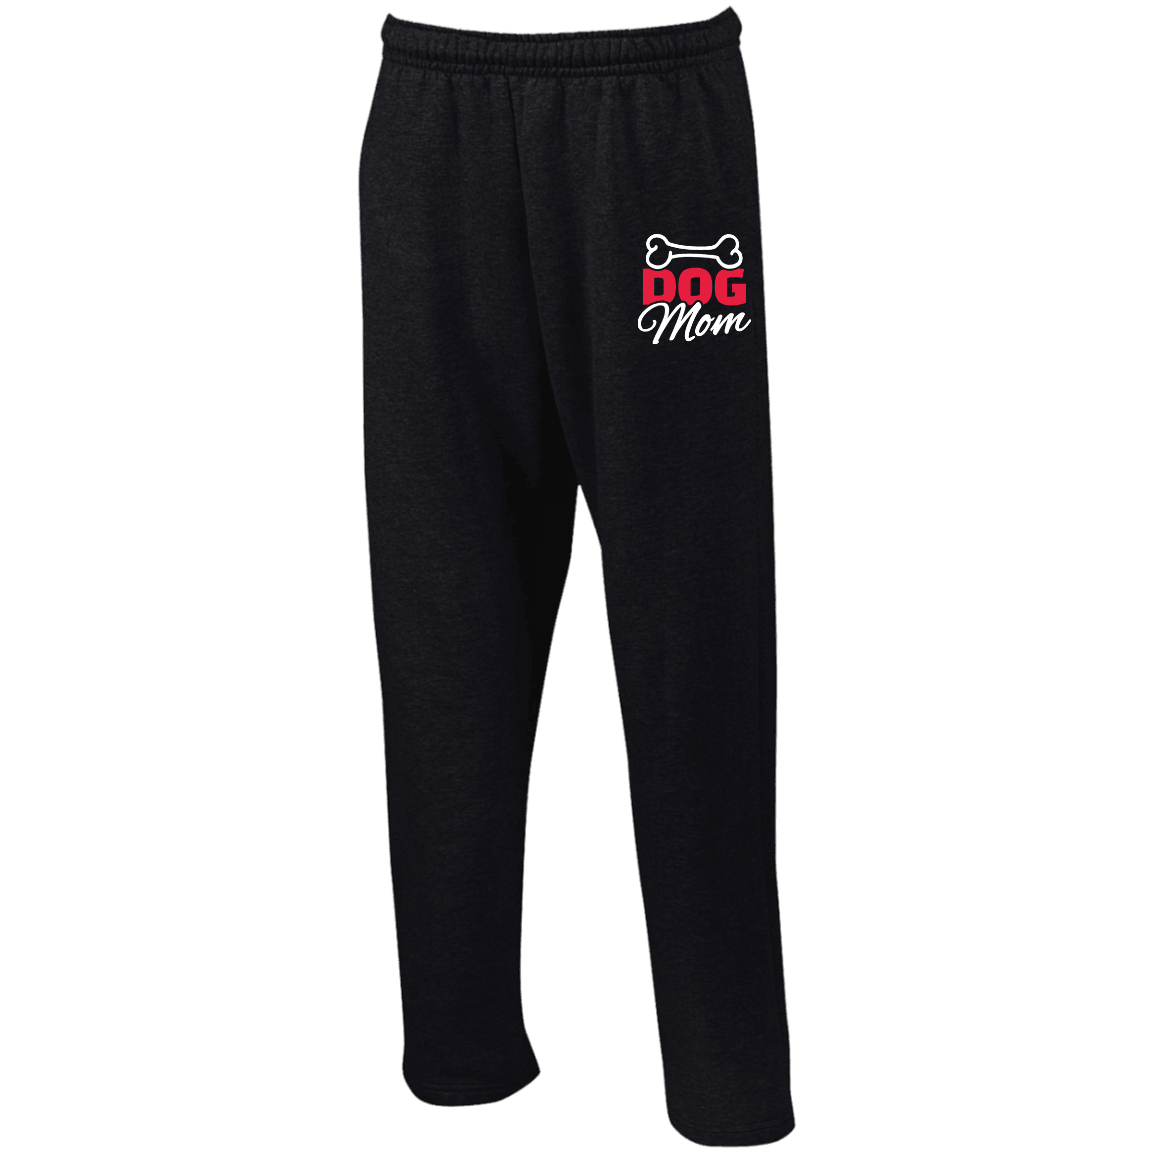 Designs by MyUtopia Shout Out:Dog Mom with Bone Embroidered Open Bottom Sweatpants with Pockets,Black / S,Pants